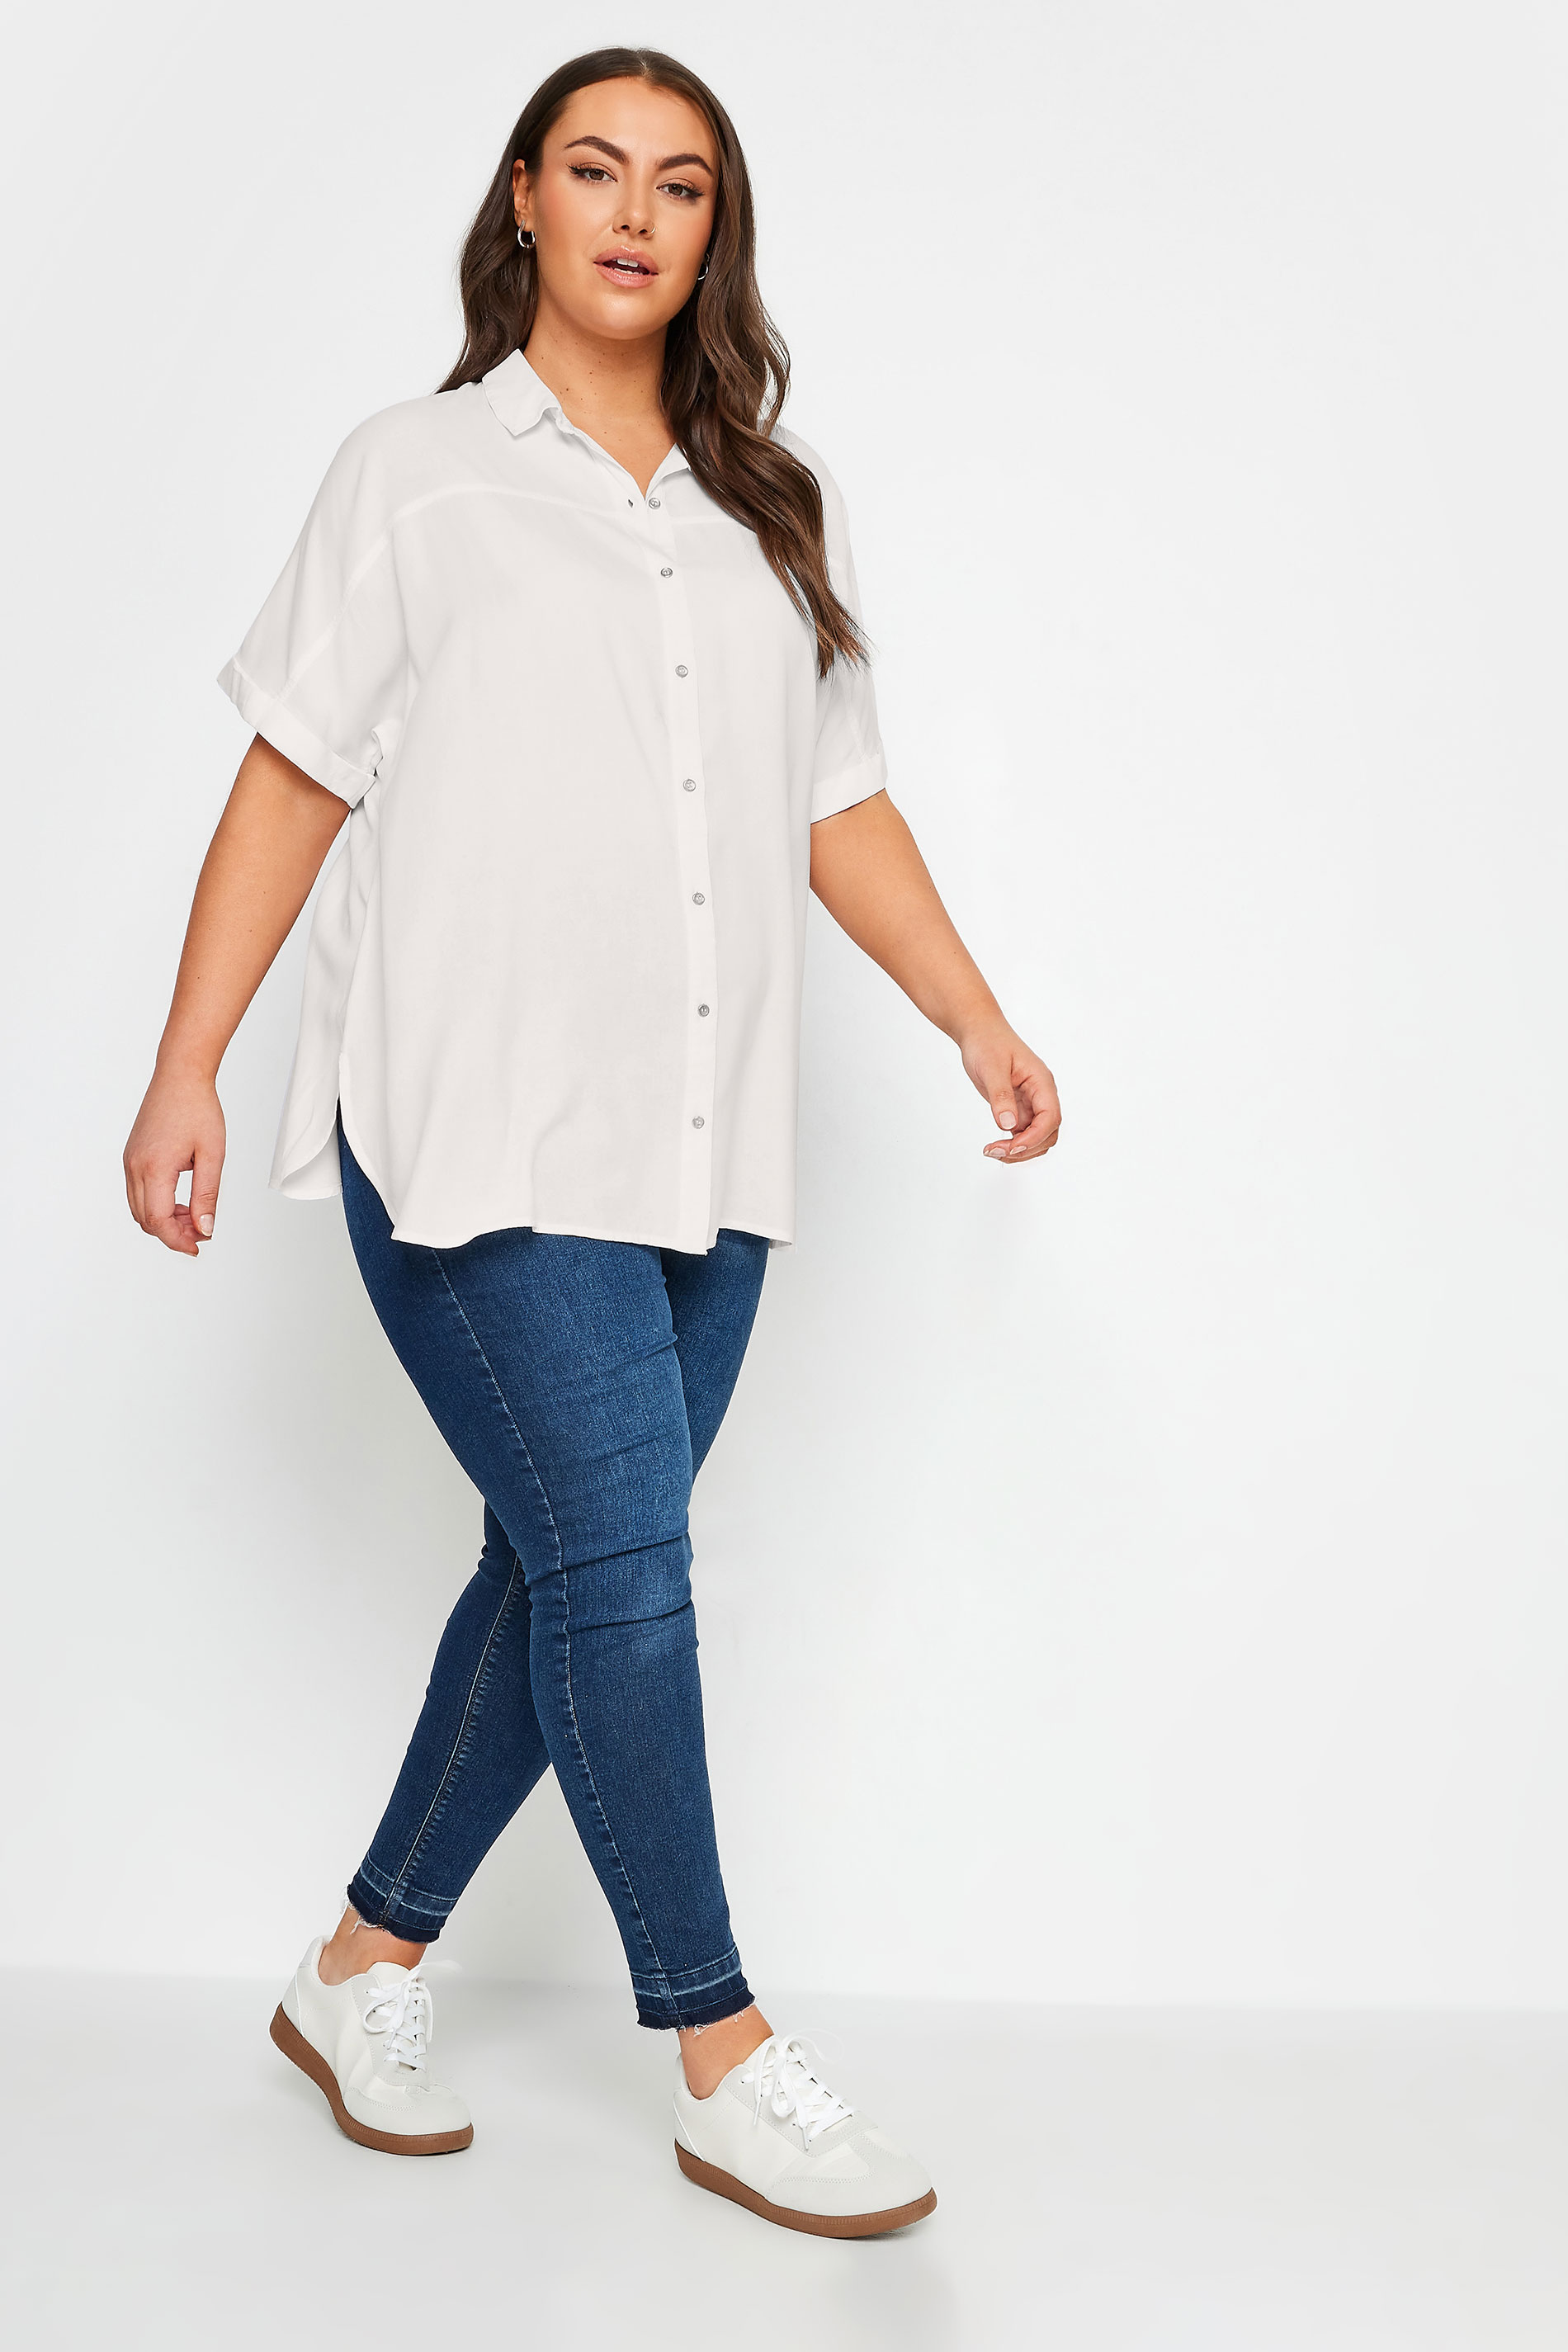 YOURS Curve Plus Size White Short Sleeve Top | Yours Clothing  2